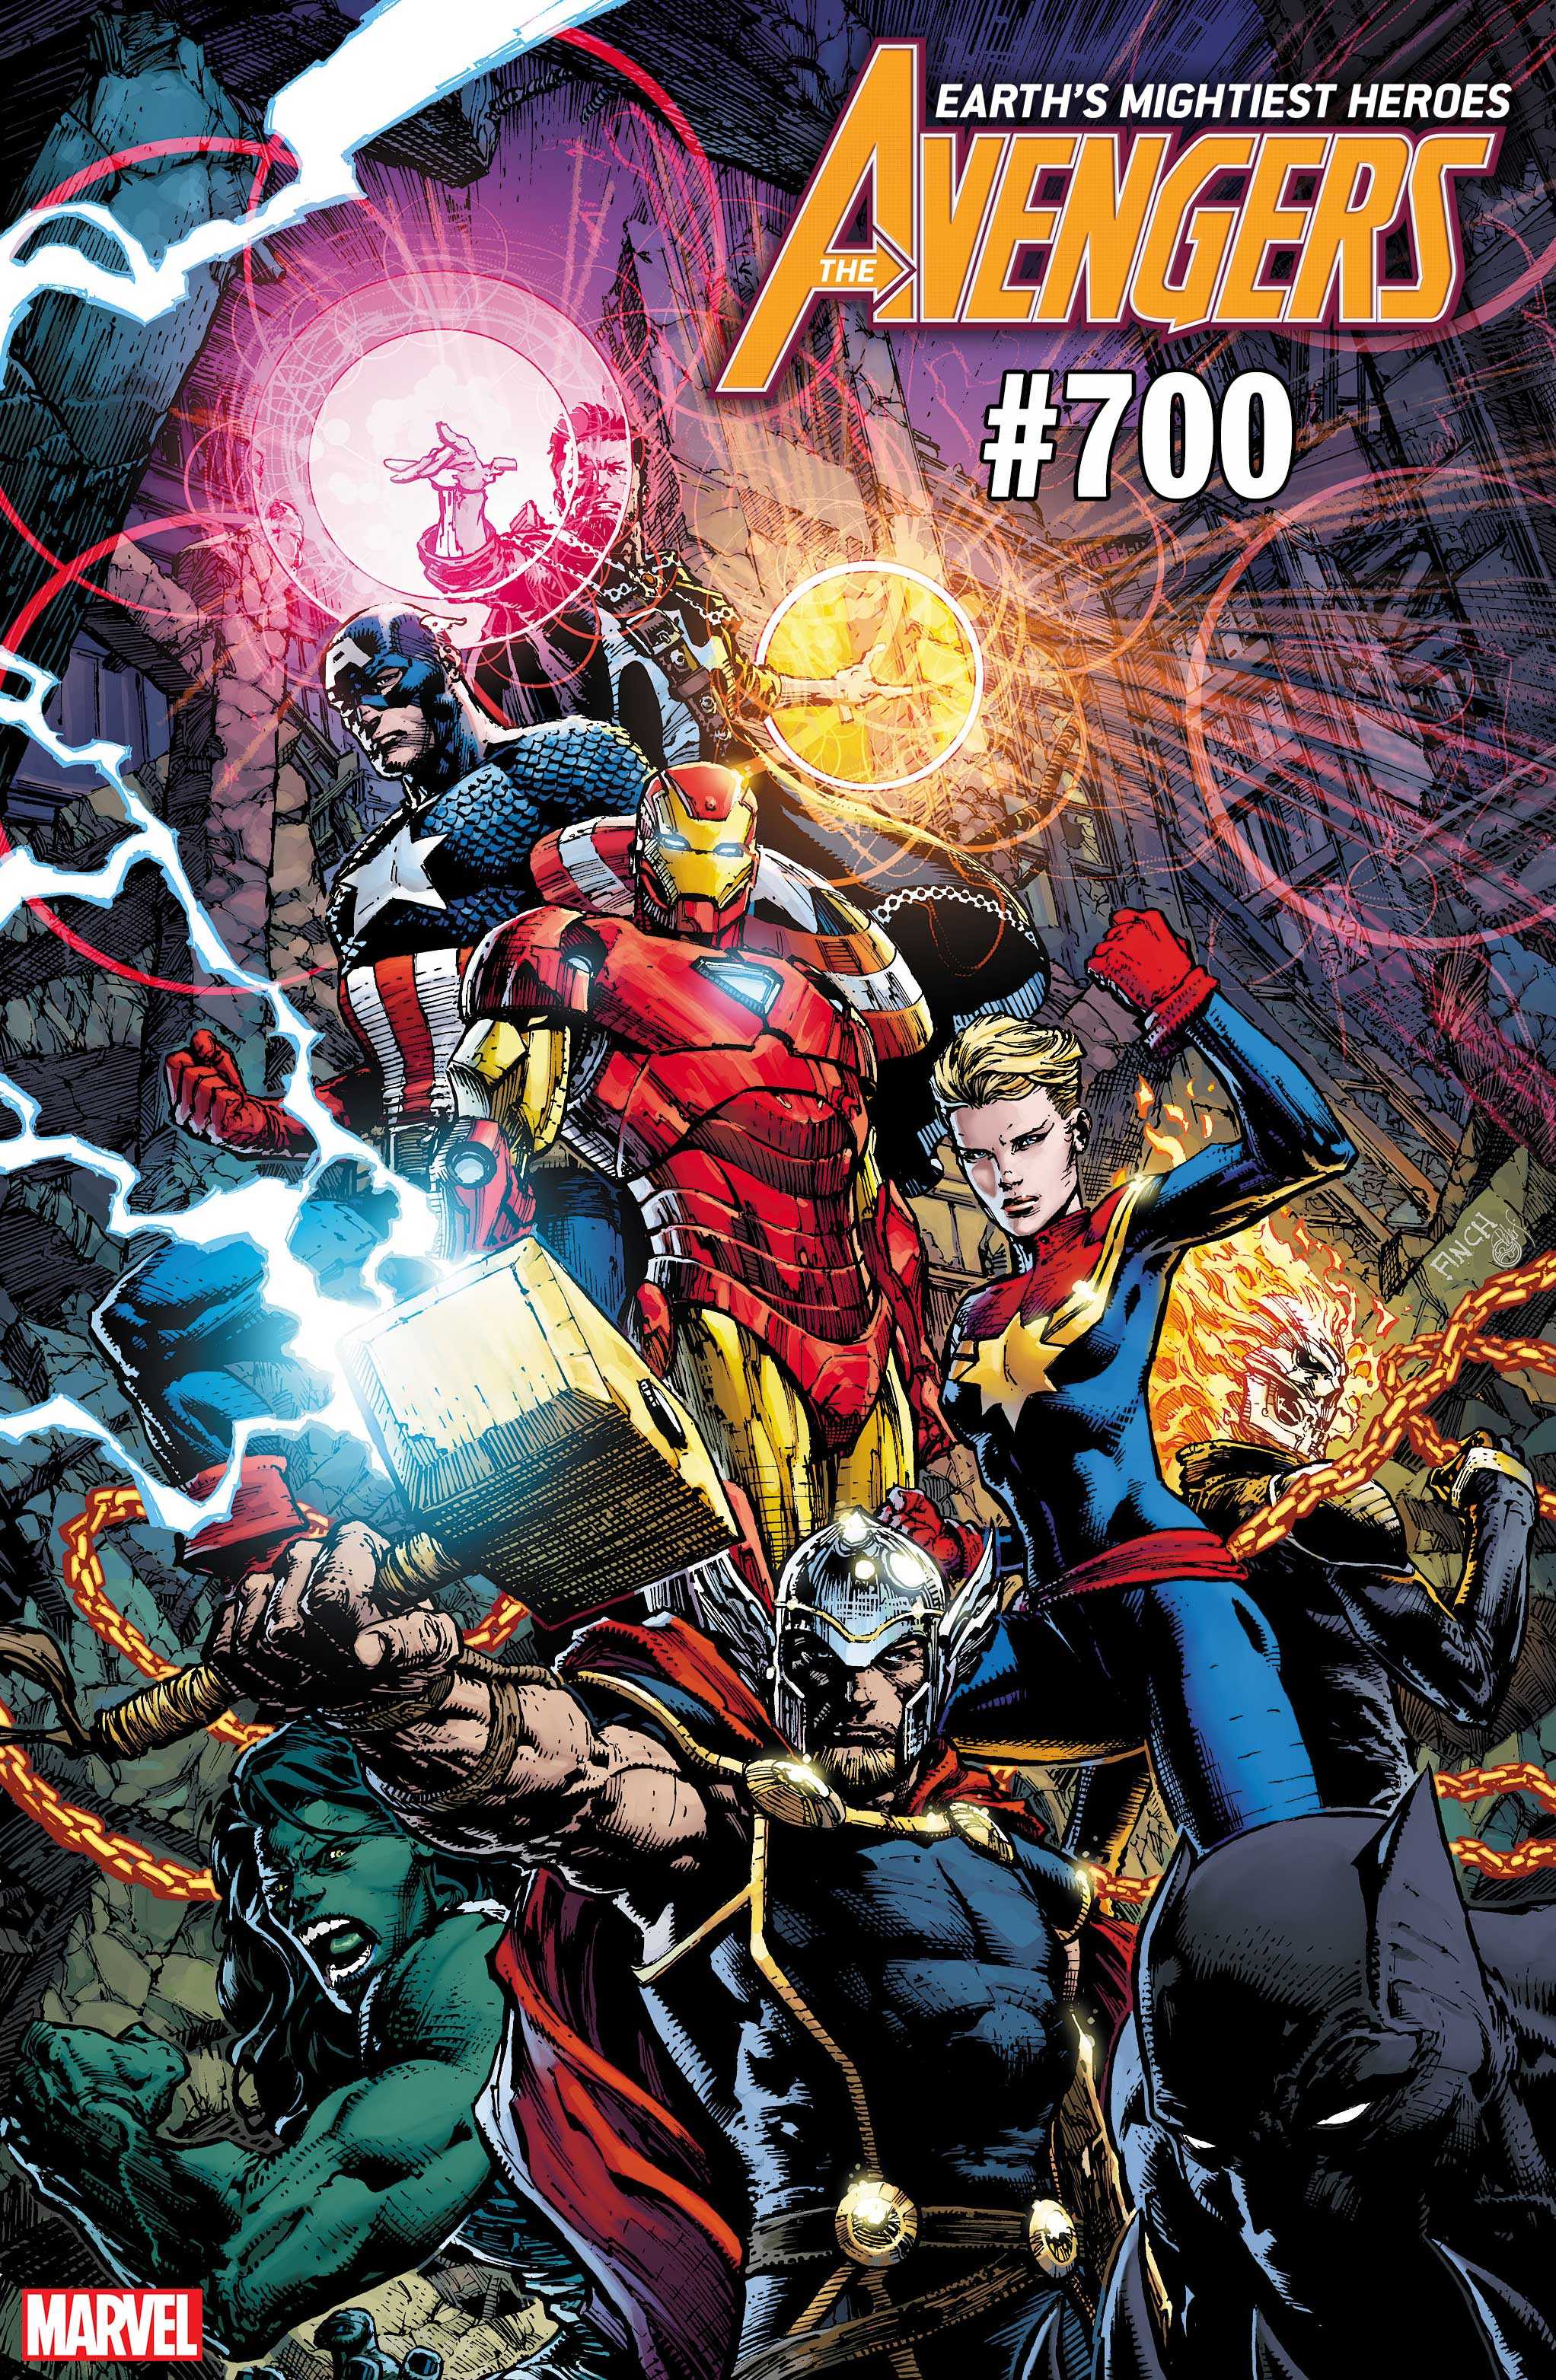 Marvel Comics News Digest Featuring Avengers Milestone Issue and Uncanny X-Men